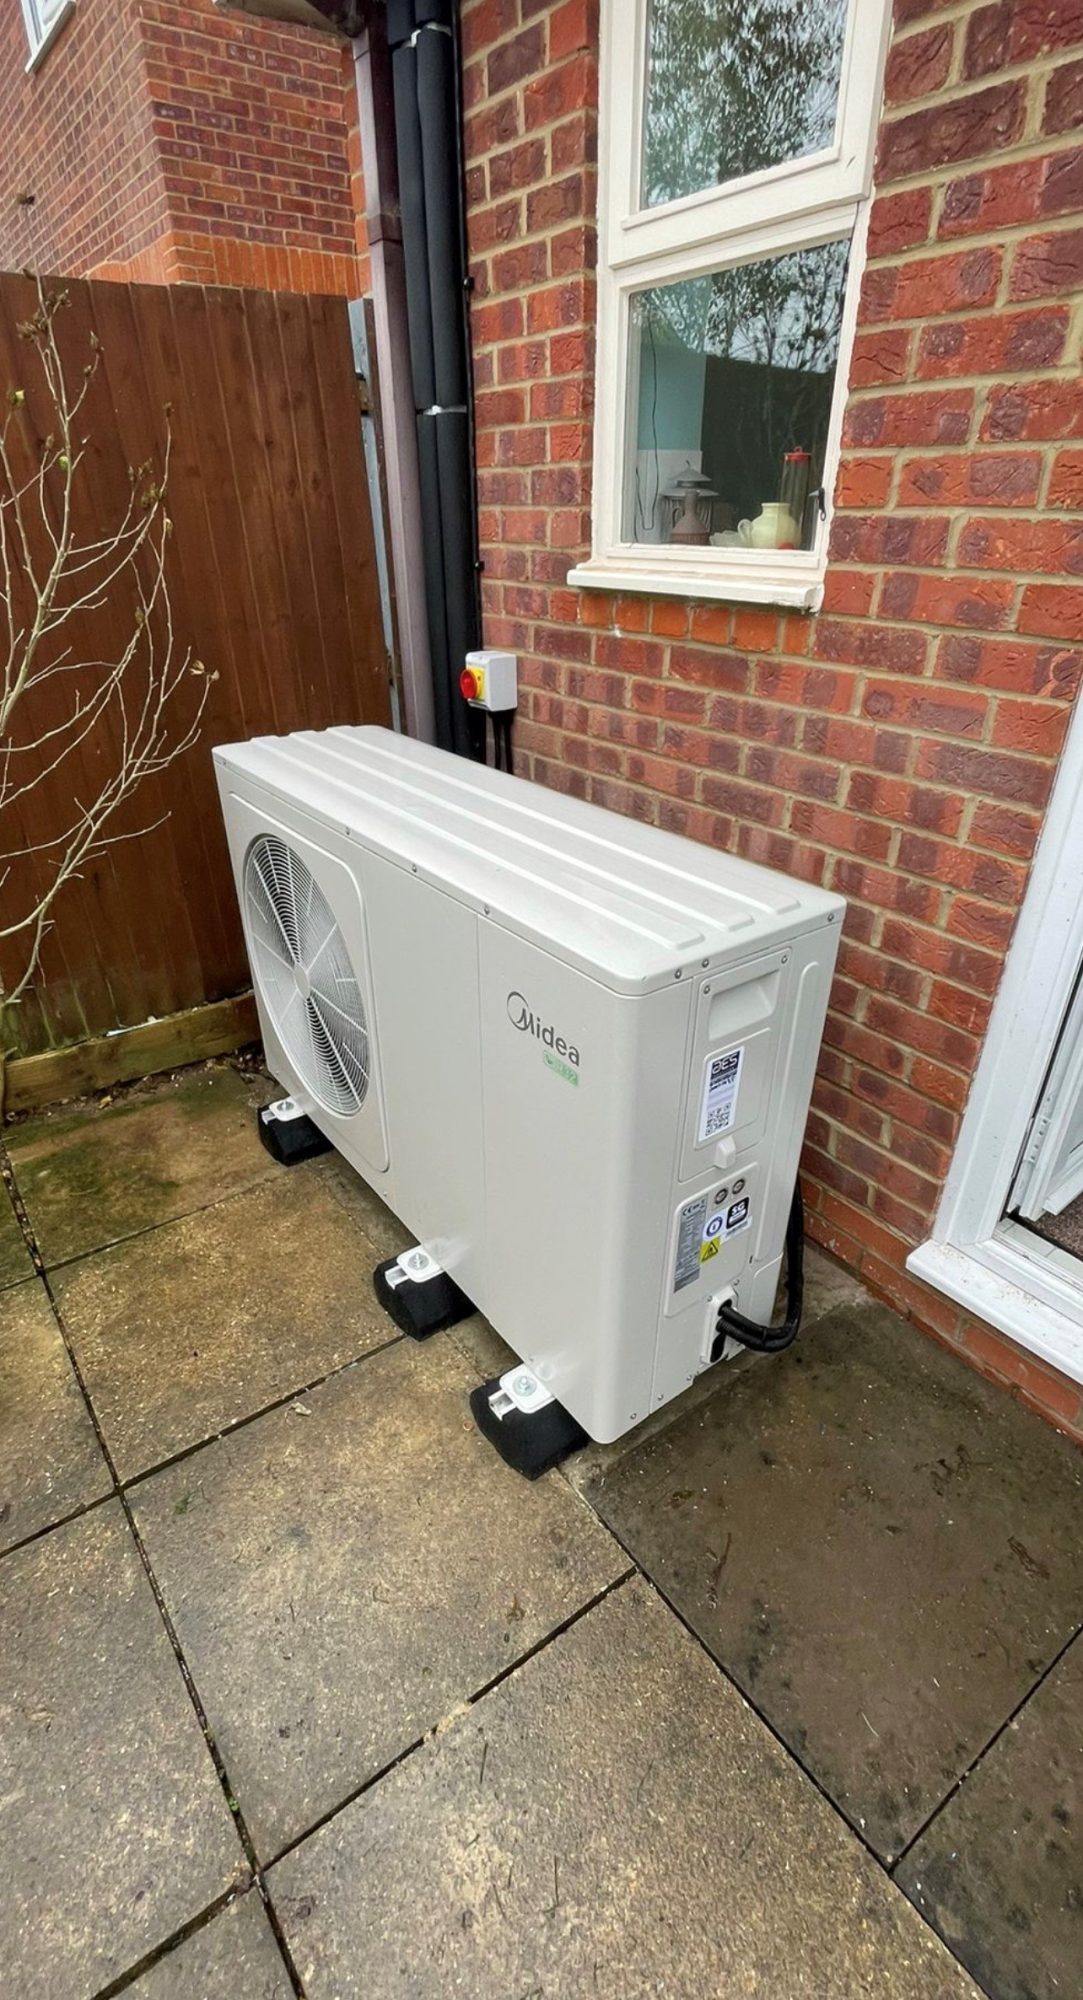 AES air-source heat pump outside of residential home